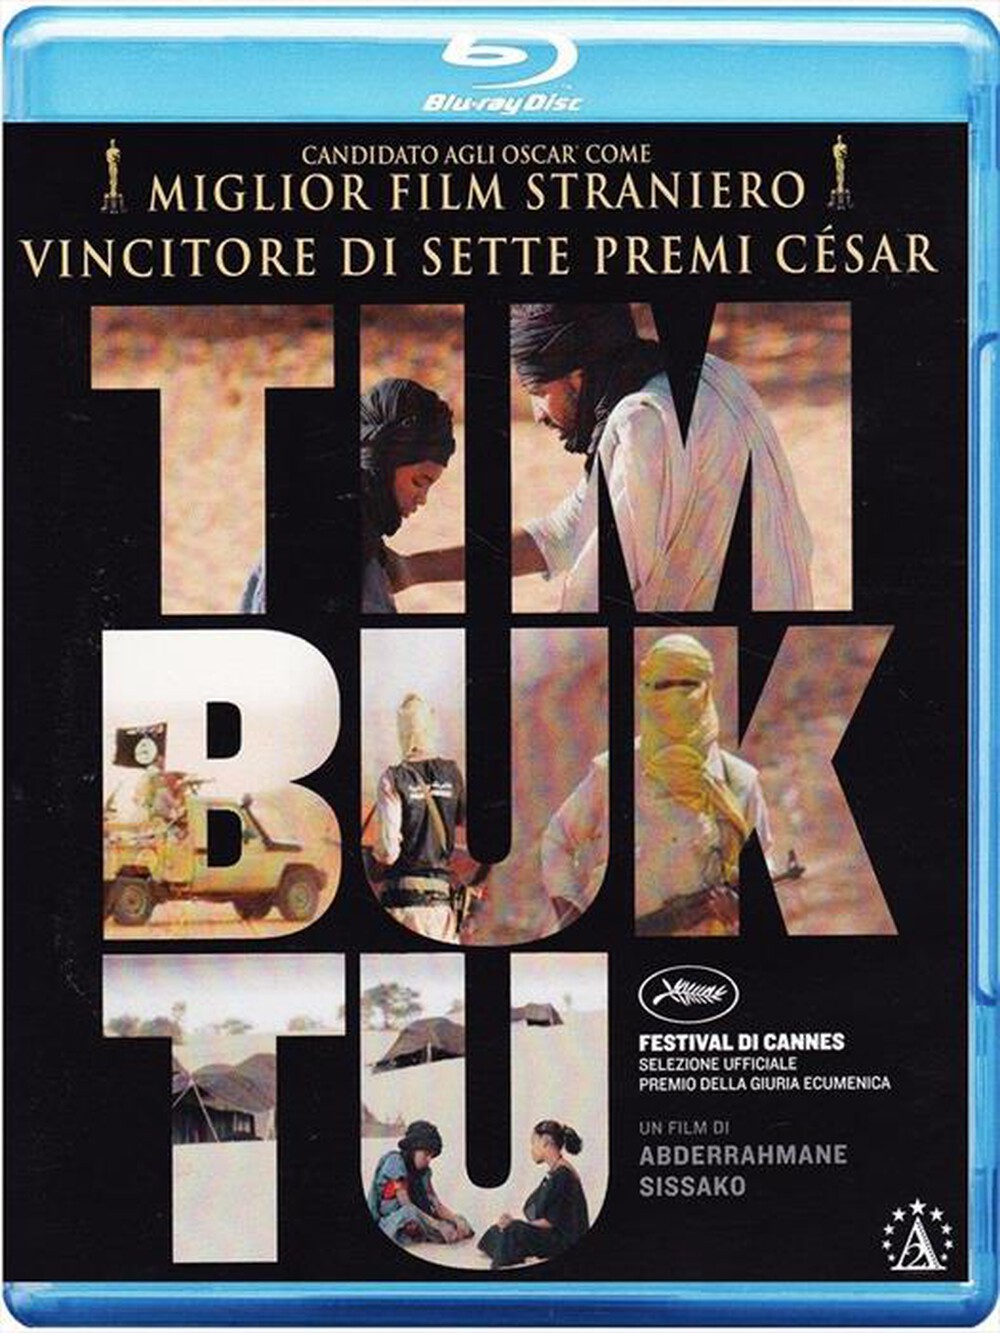 "EAGLE PICTURES - Timbuktu"